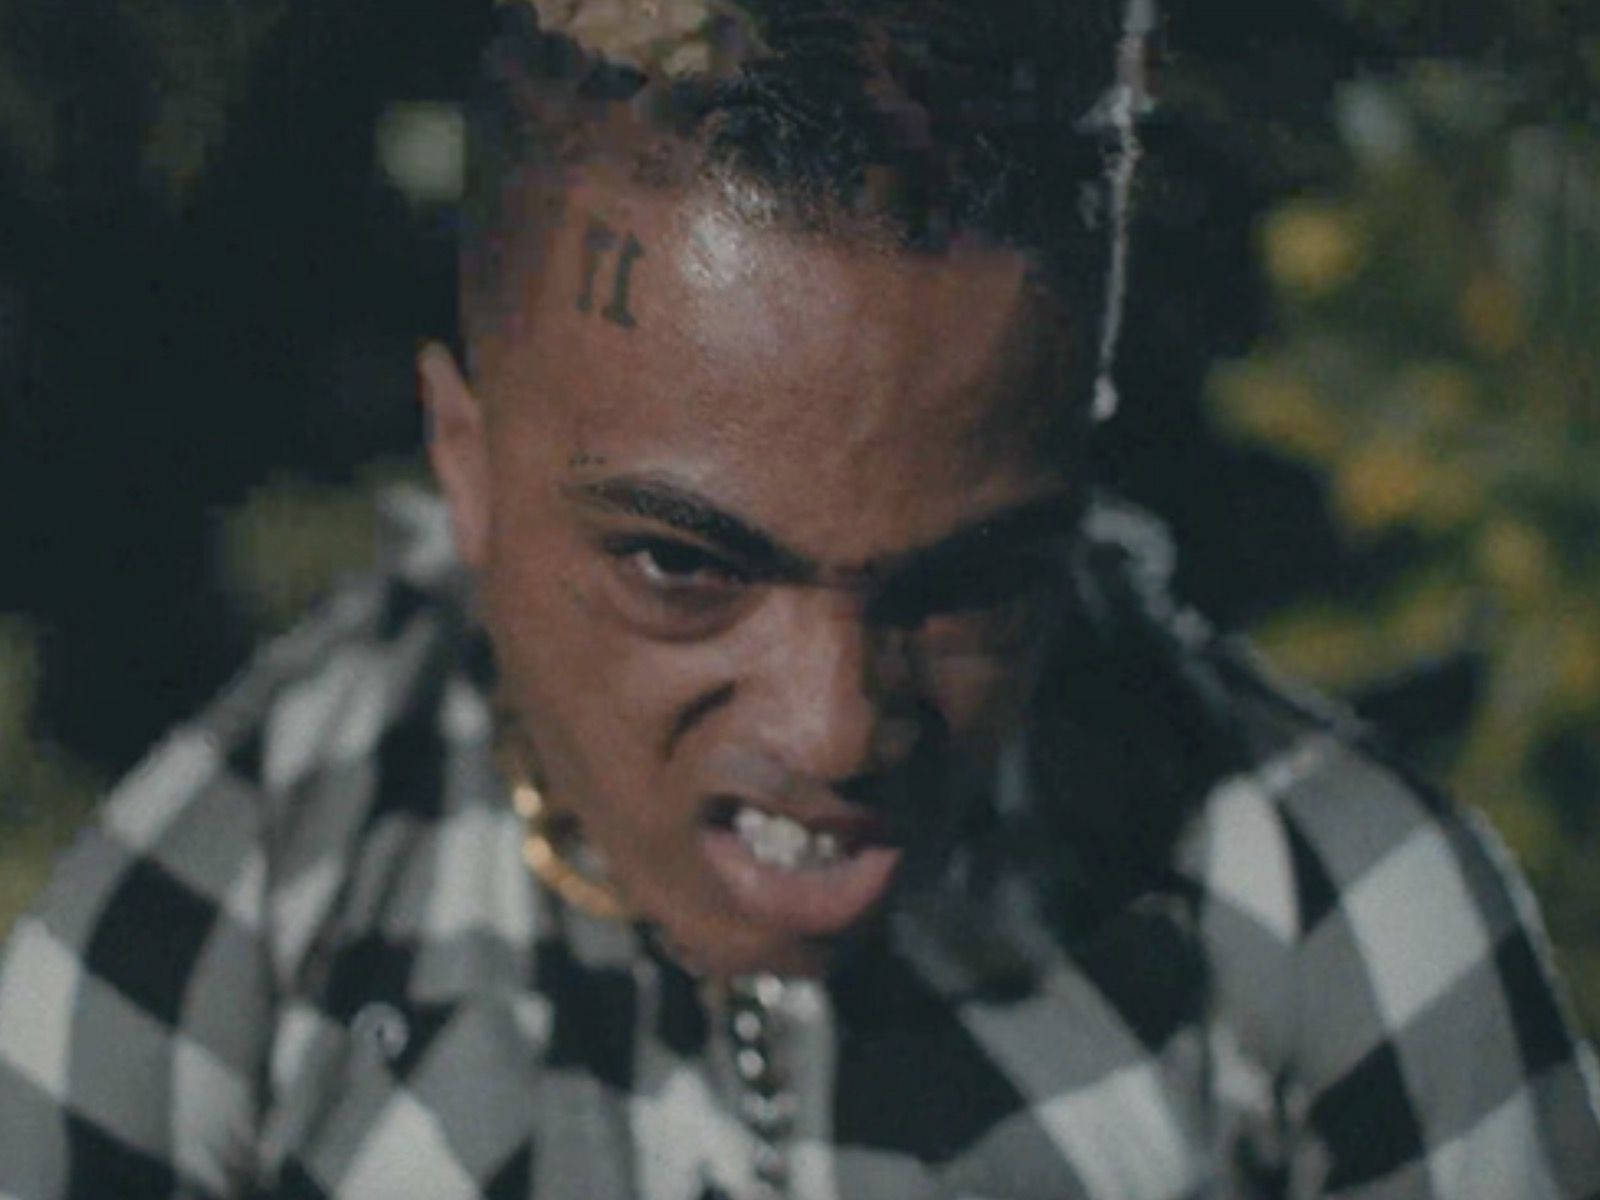 XXXTentacion performing to an angry crowd Wallpaper